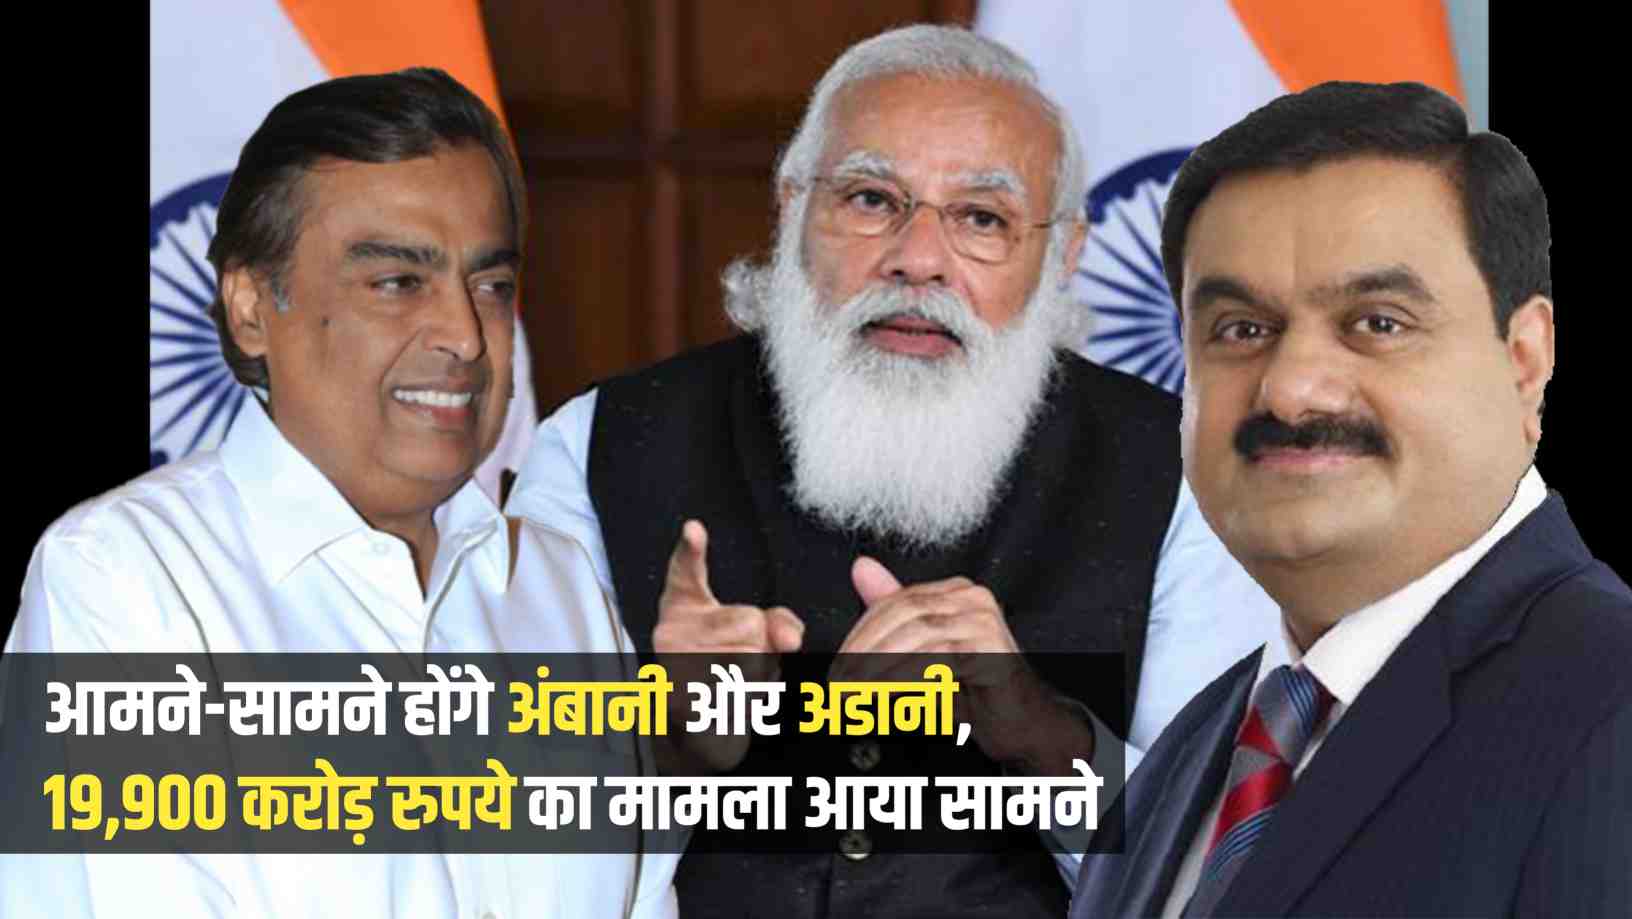 Ambani and Adani will face each other in a case worth Rs 19,900 crore regarding Green Hydrogen.